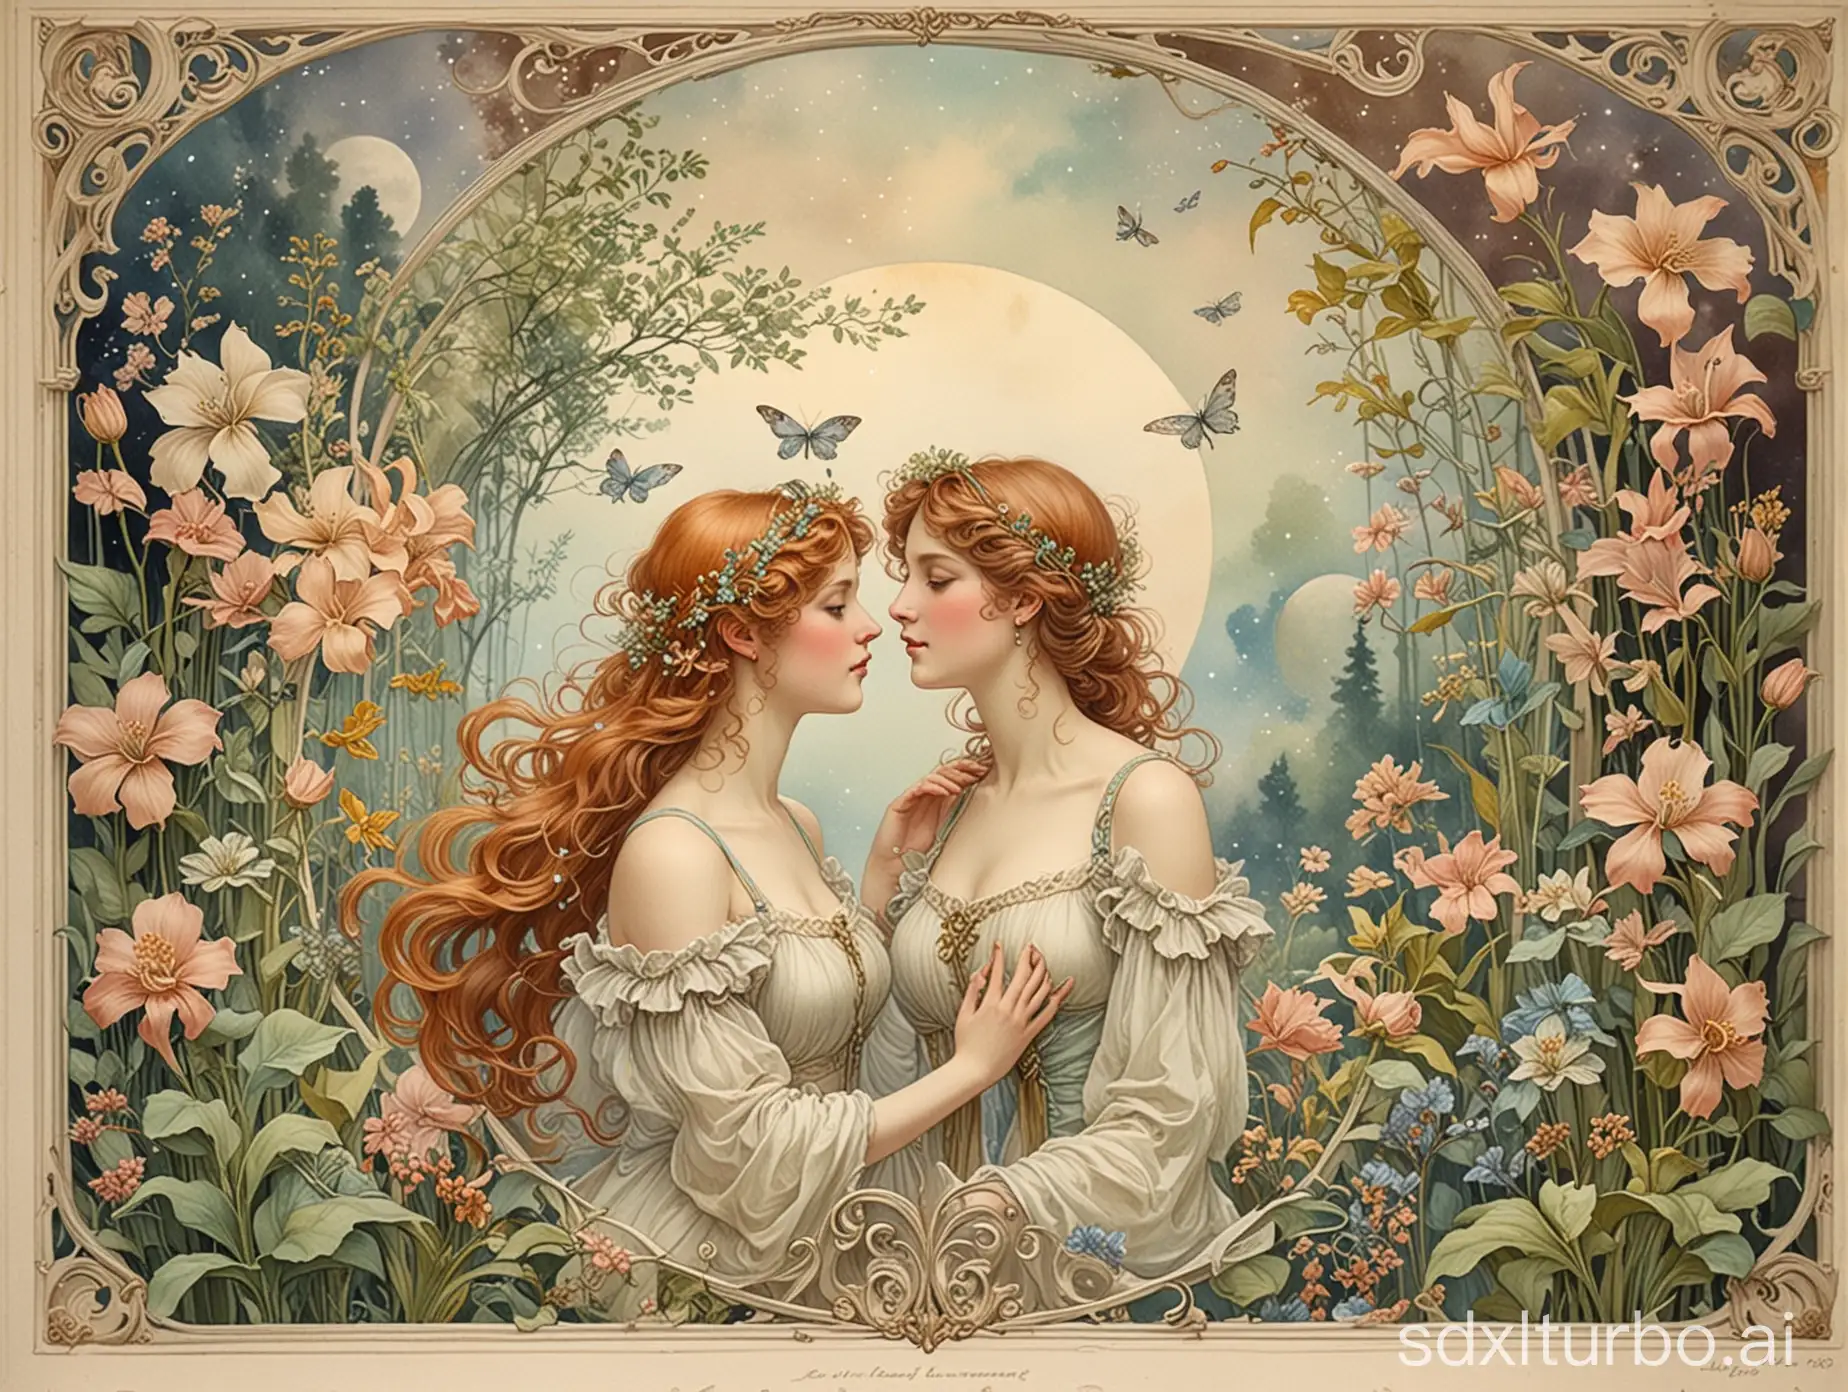 End of the century Art Nouveau Space Pastoral, delicate detailed drawing and elaborate watercolor painting